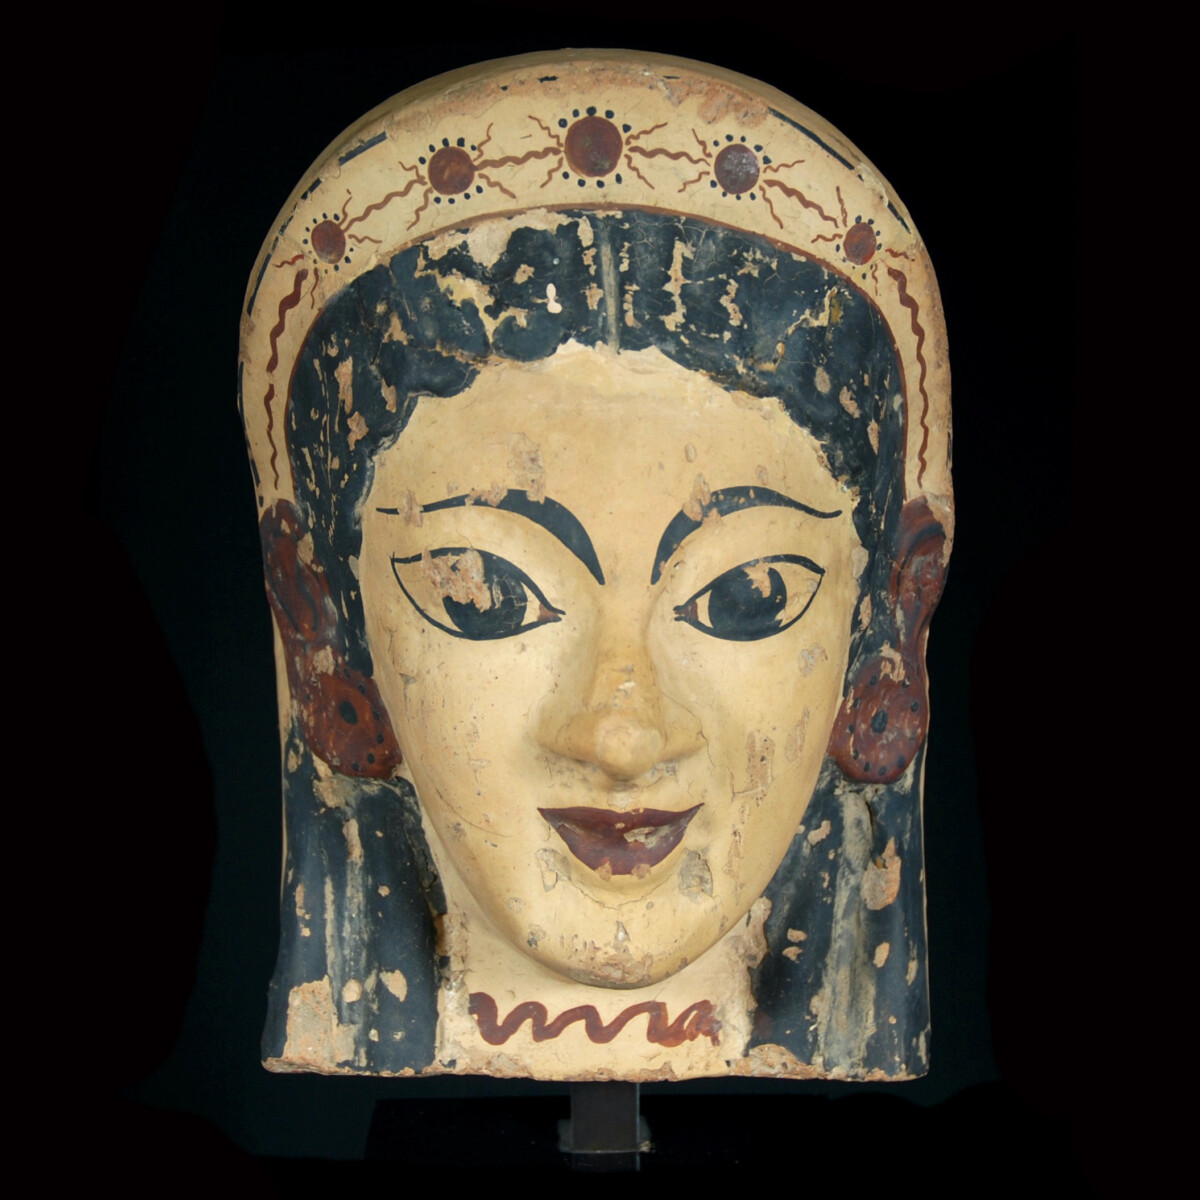 Archaic etruscan terracotta antefix with the head of a woman